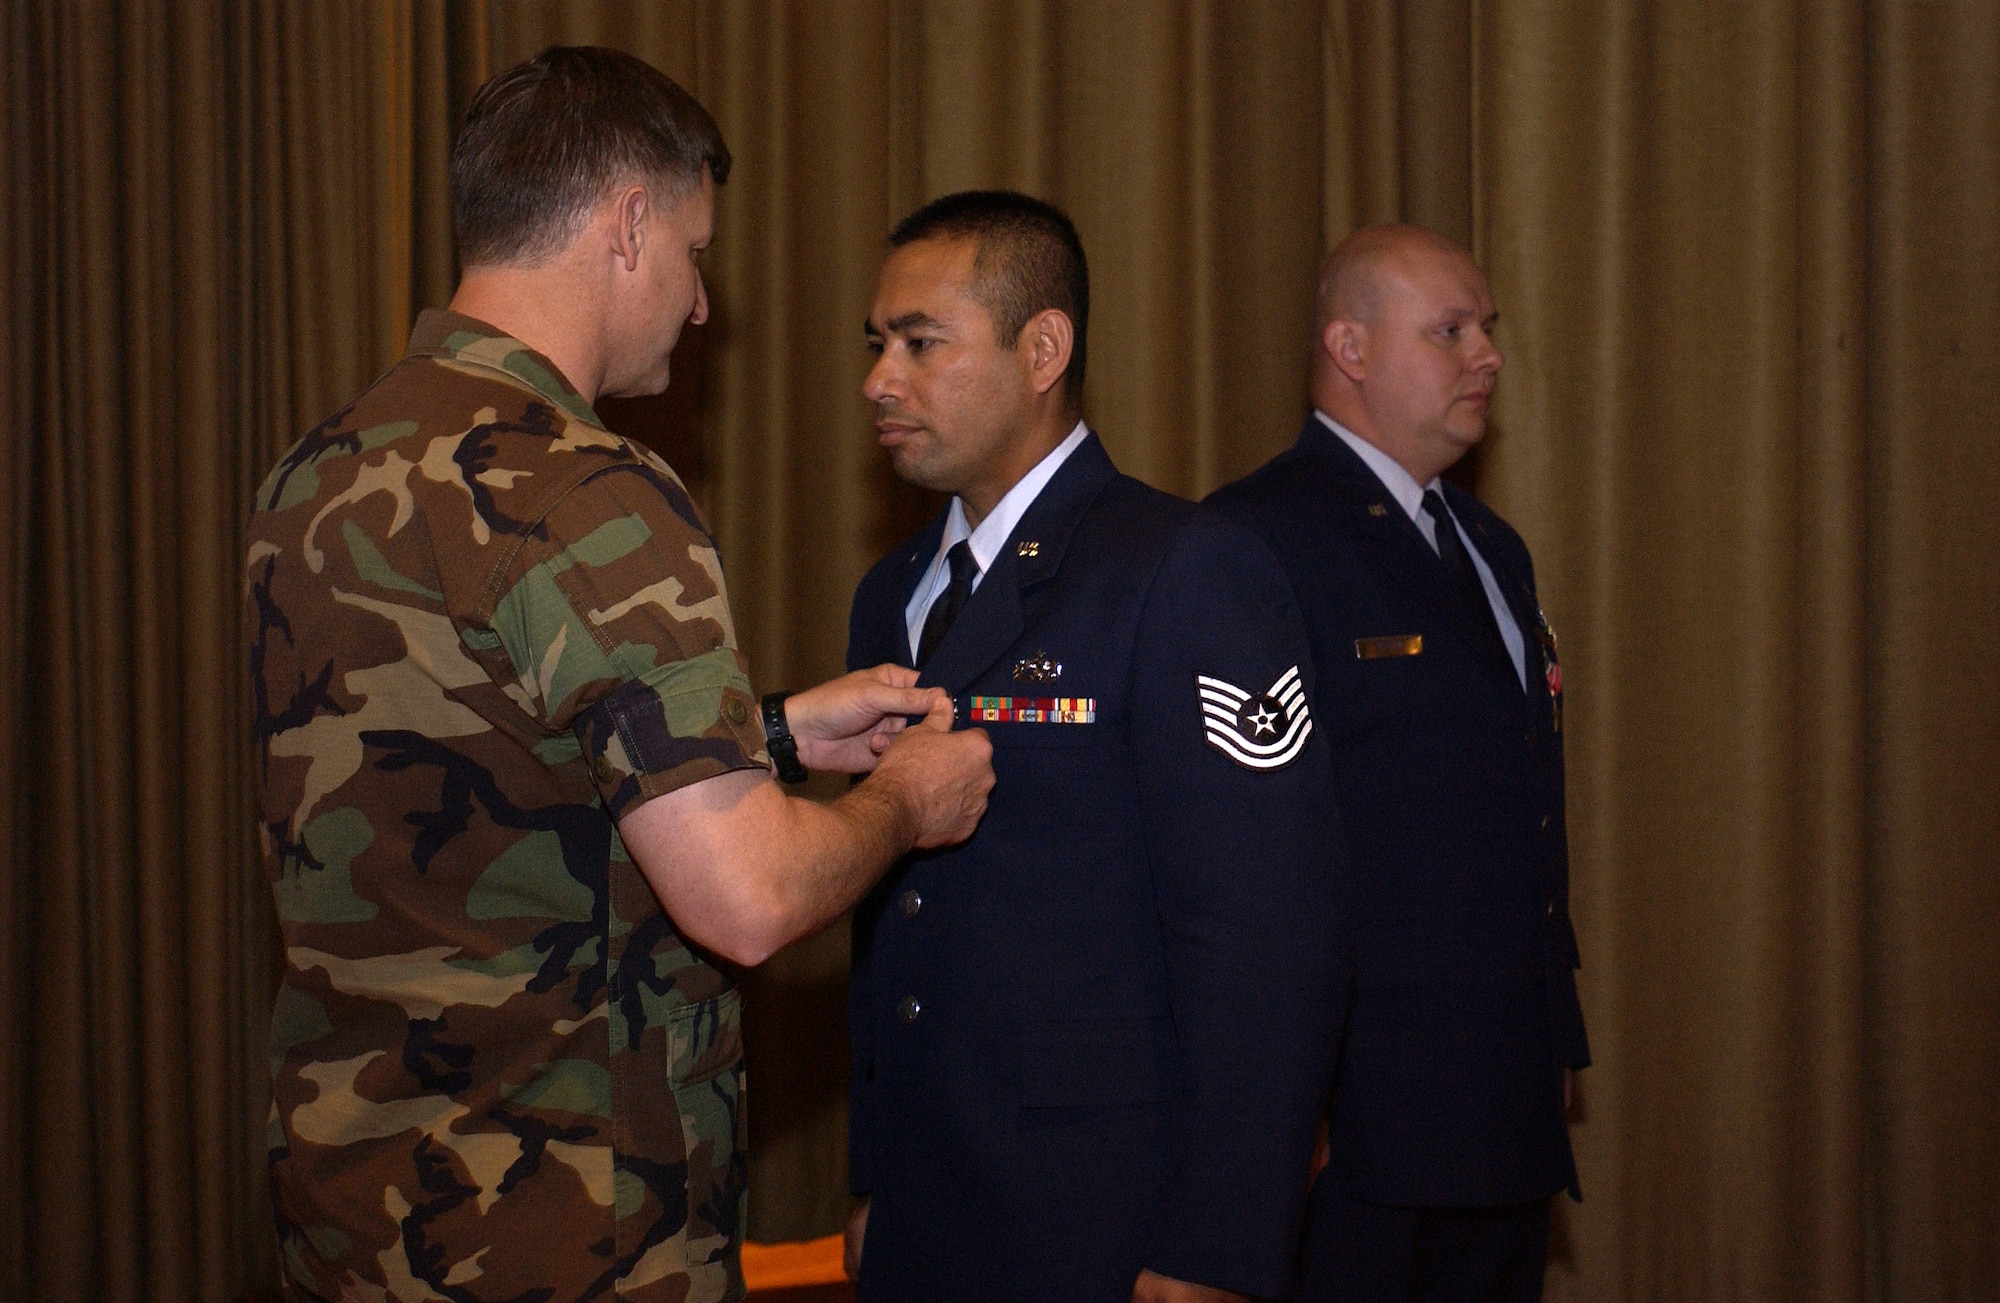 Tech. Sgt. Tyrone Sevening receives the Bronze Star Medal from Col. Michael Bartley, 99th Air Base Wing commander, Monday during commander's call in the base theater at Nellis Air Force Base, Nev. Tech. Sgt. Andrew Morin (right) also received the Bronze Star. Both NCOs, assigned to the 99th Logistics Readiness Squadron, were convoy commanders in Iraq. (U.S. Air Force photo/Staff Sgt. Colette Bennett)